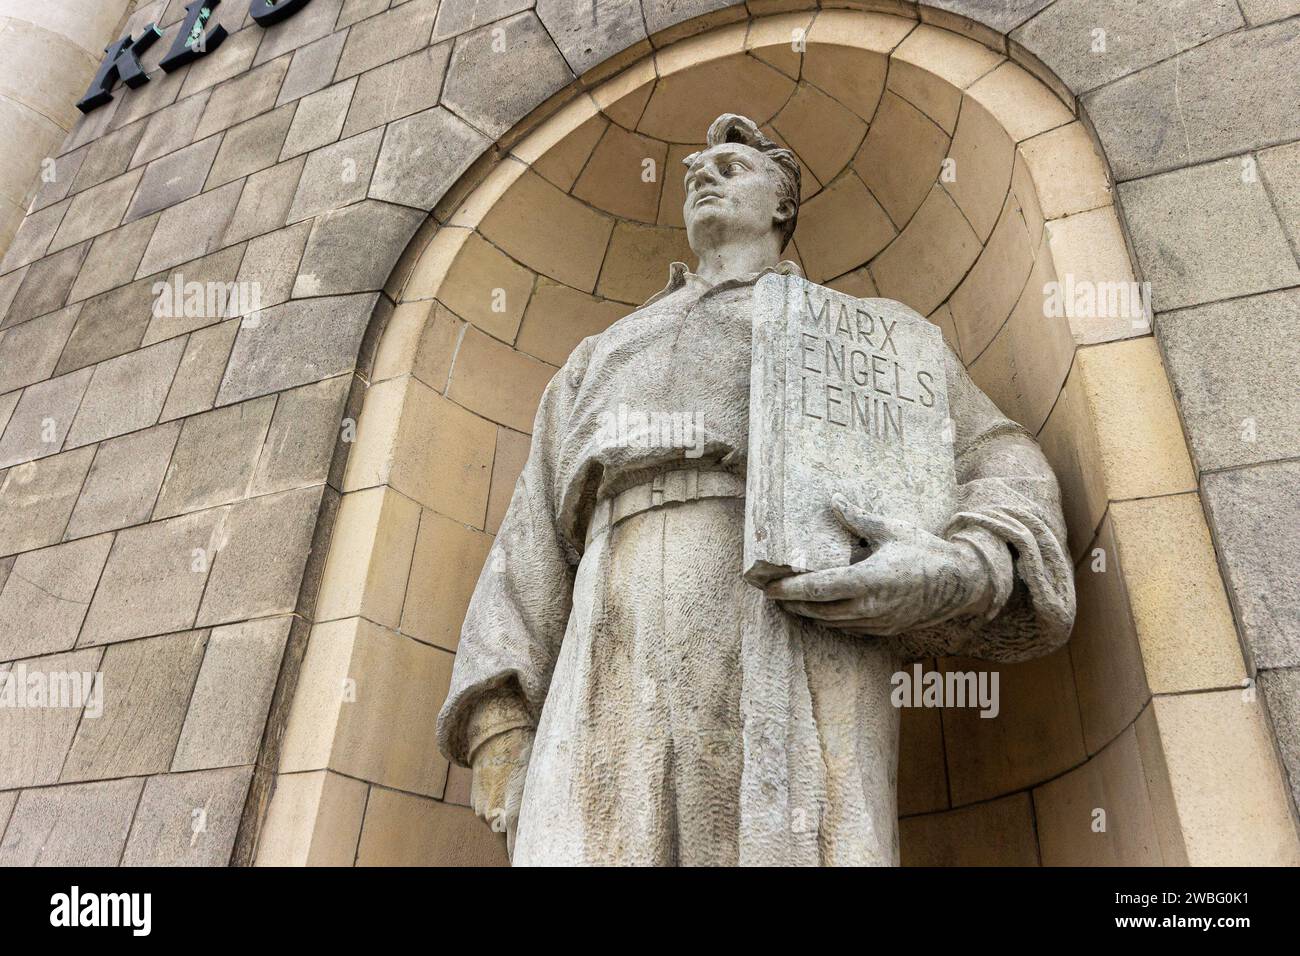 Warsaw, Poland. Detail of a statue in the Palace of Culture and Science (Palac Kultury i Nauki - PKiN) Stock Photo